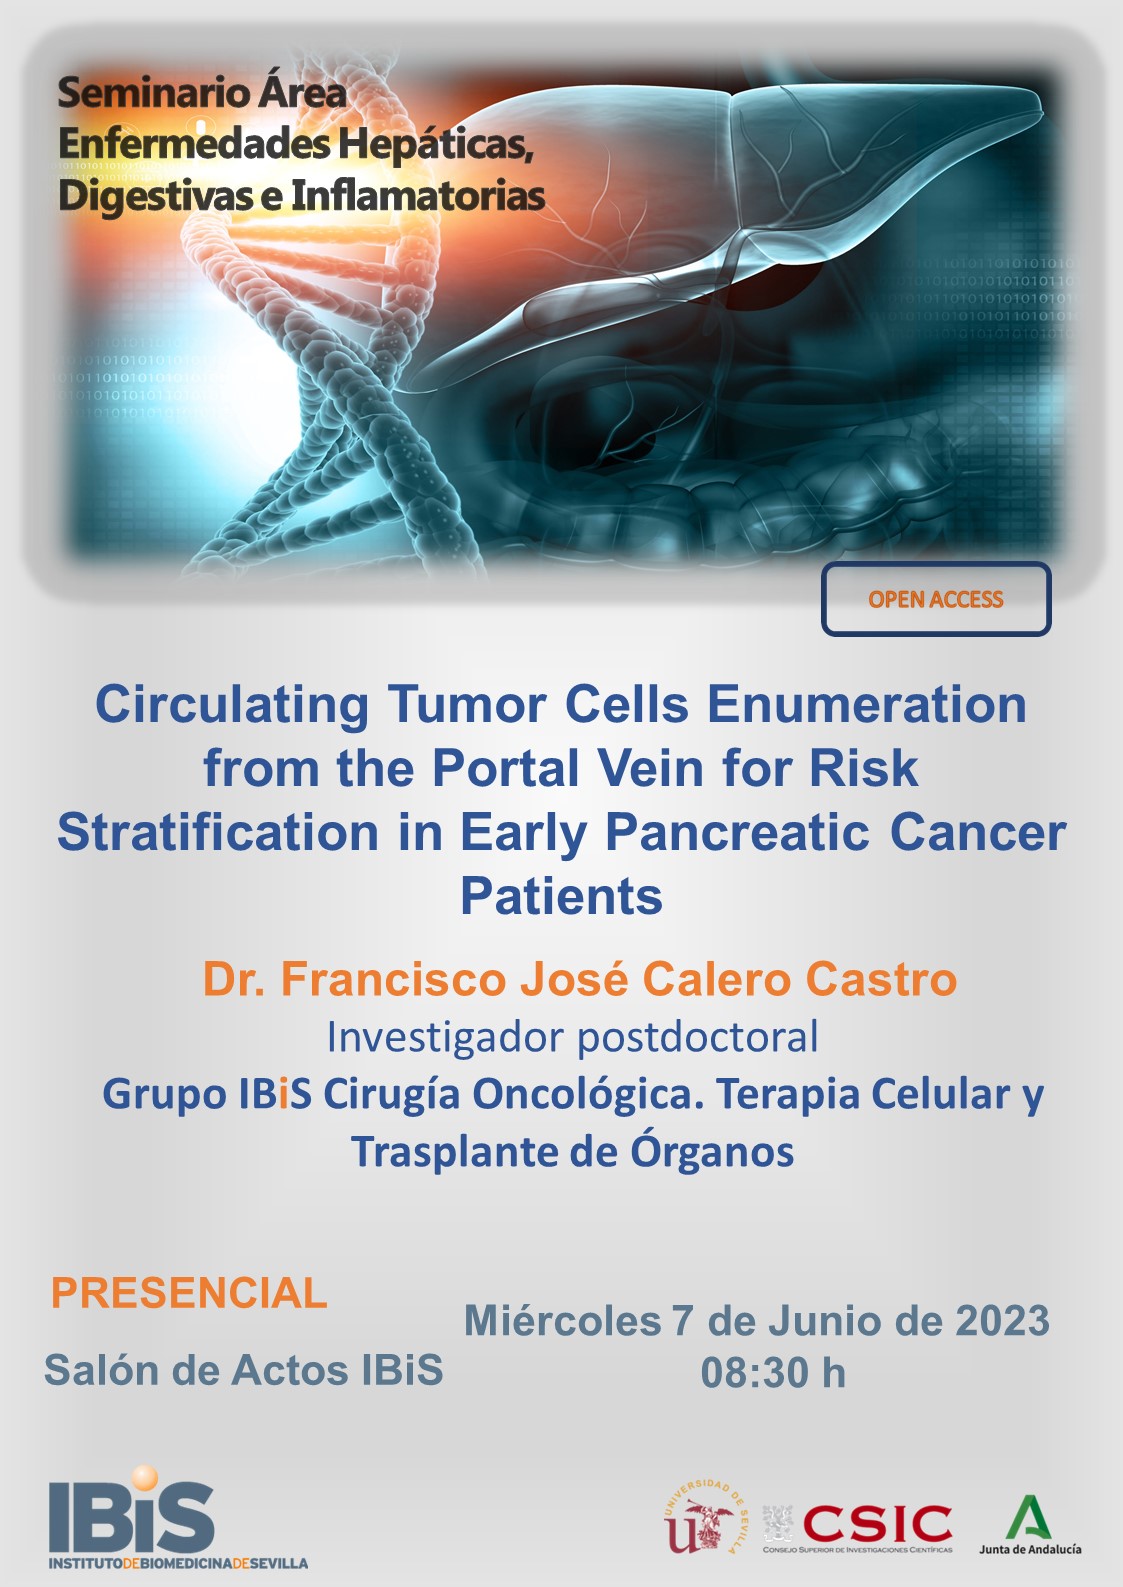 Poster: Circulating Tumor Cells Enumeration from the Portal Vein for Risk Stratification in Early Pancreatic Cancer Patients